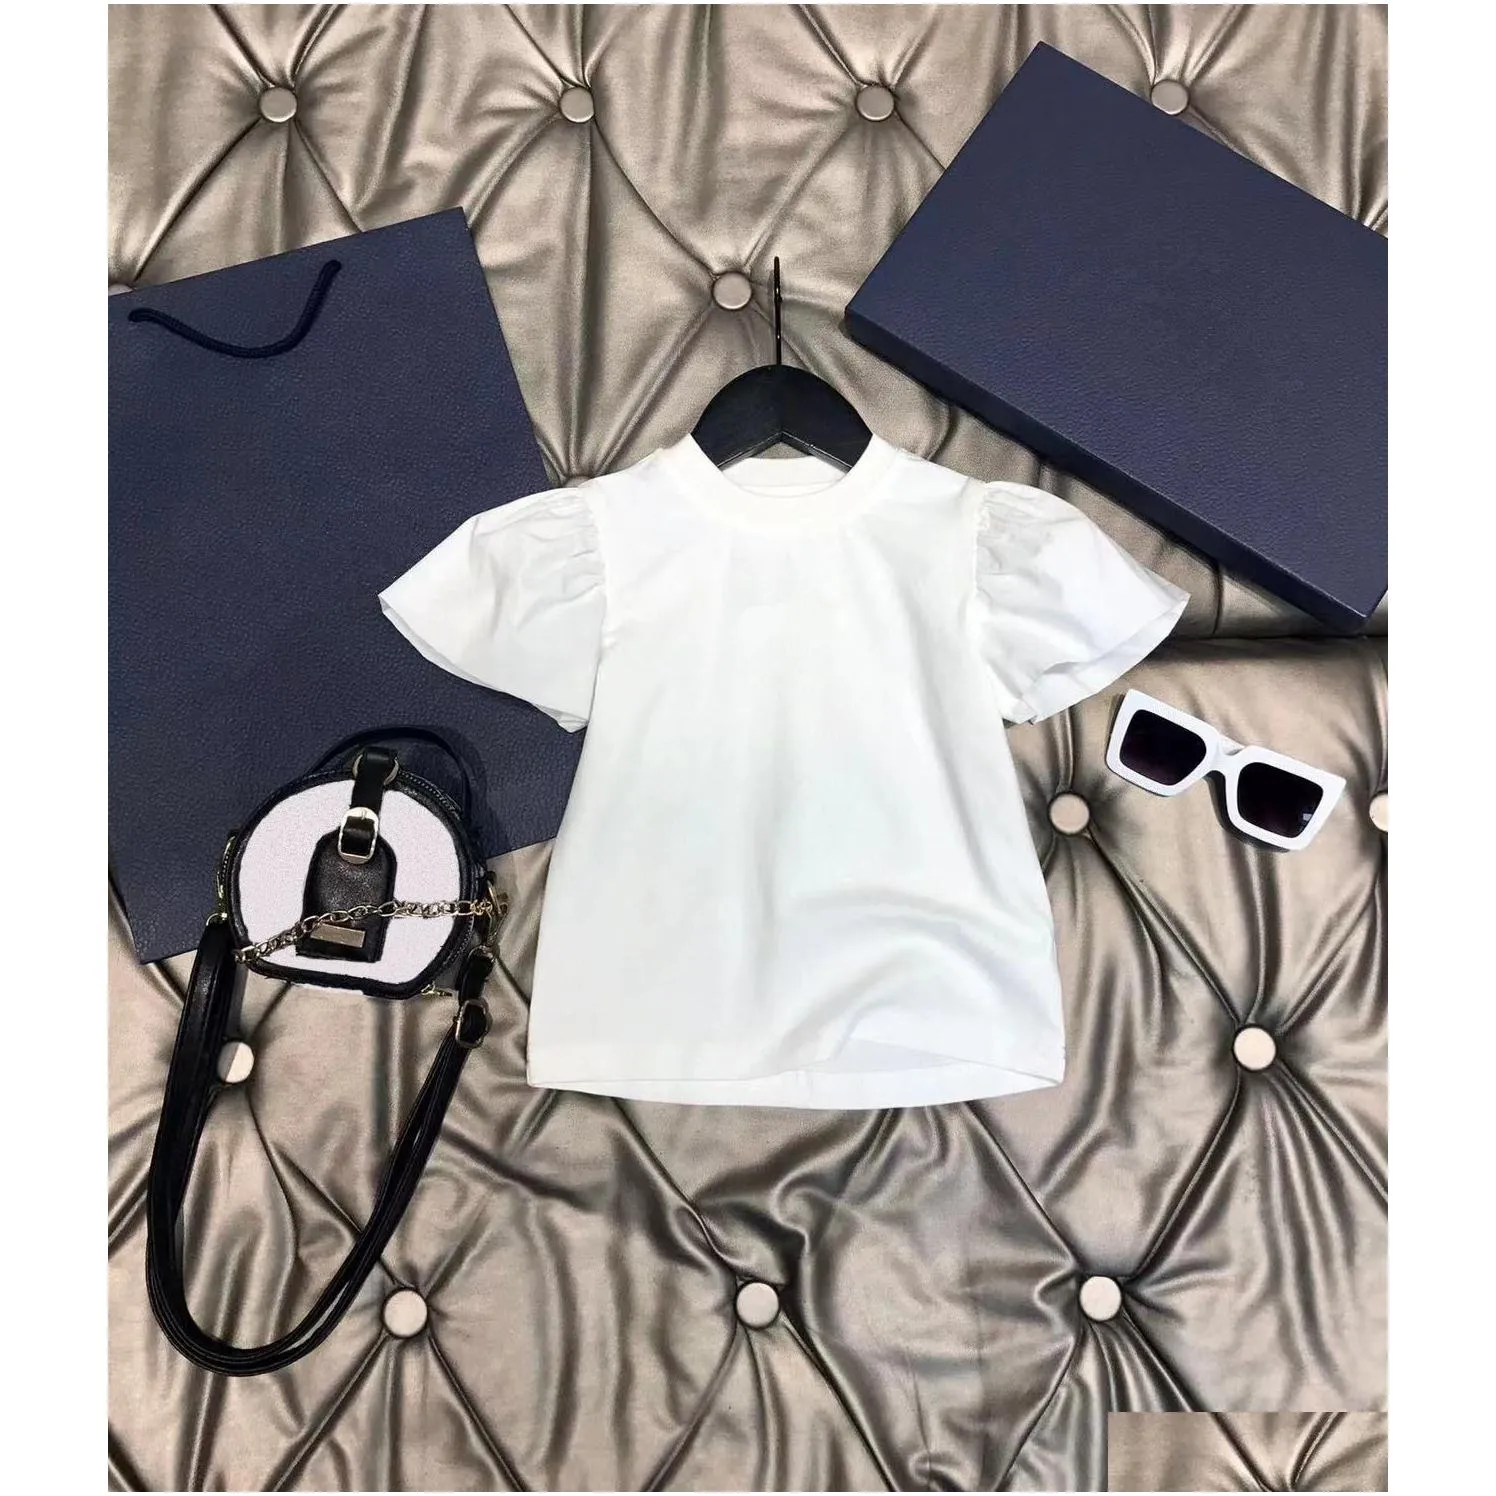 kids designer clothes sets fashion korean quality baby boys girls outfits short sleeve tops and full letter printing skirt or shorts 2pcs set kids